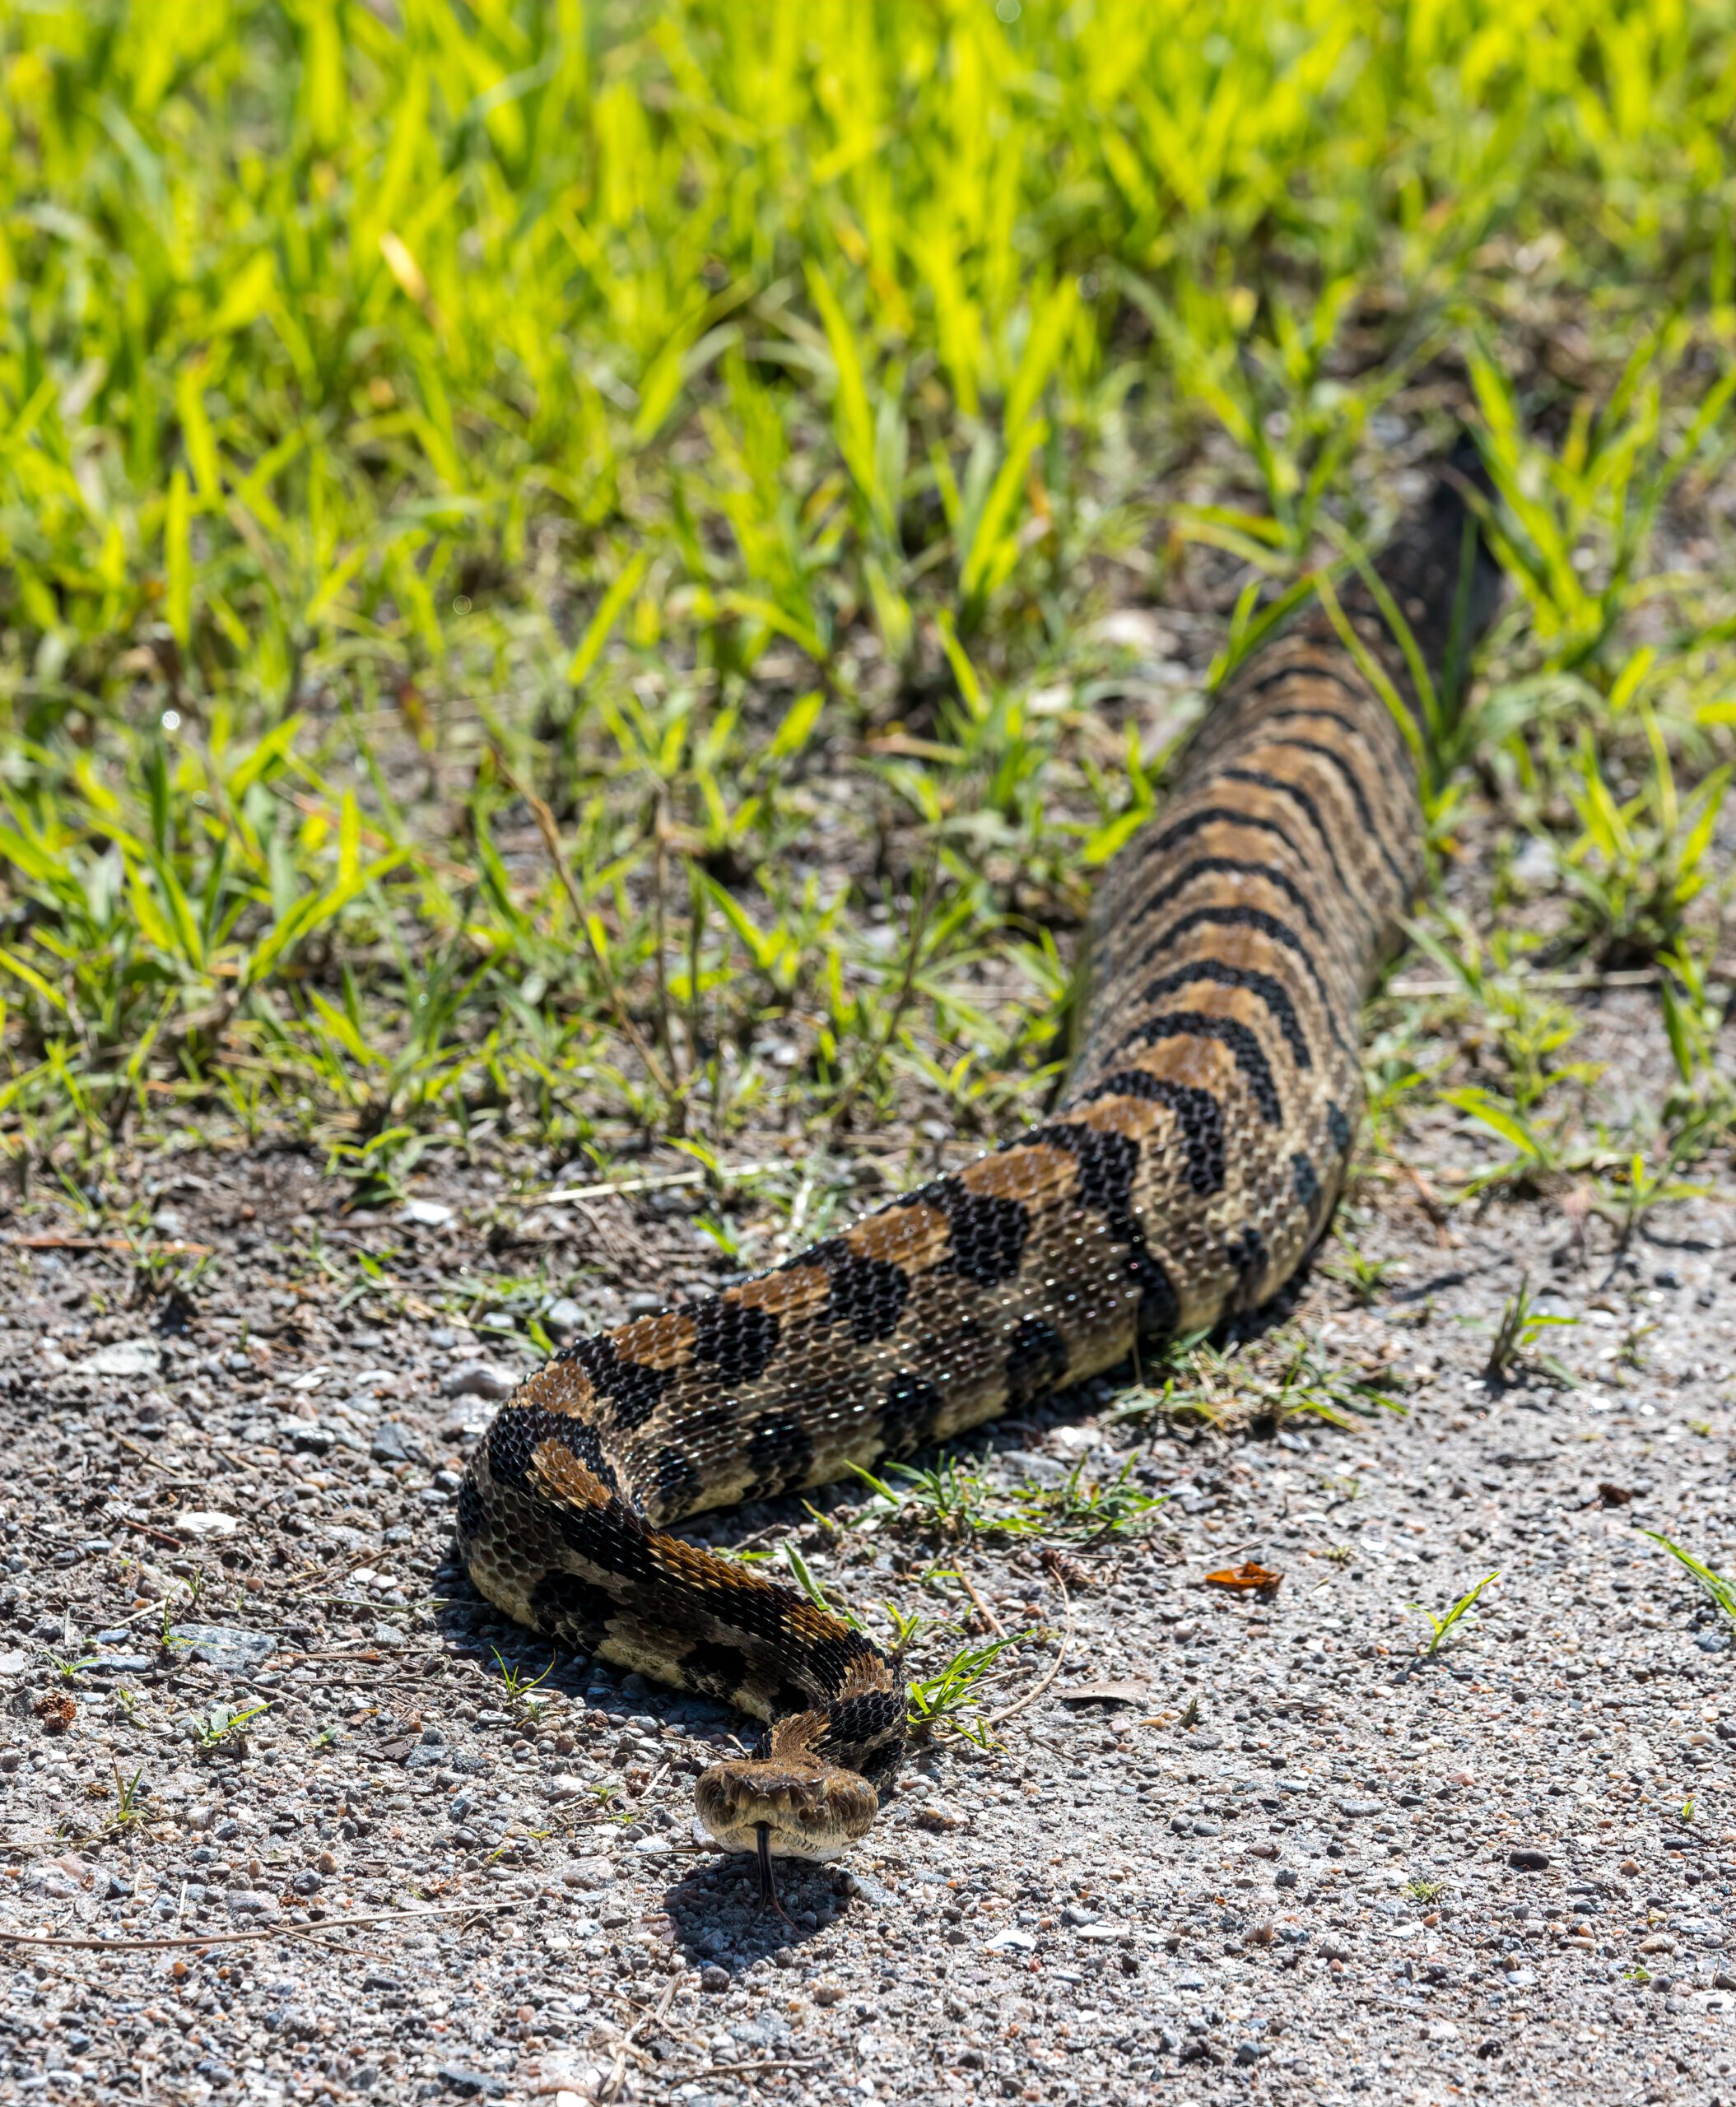 A timber rattlesnake slithering over a dirt path.